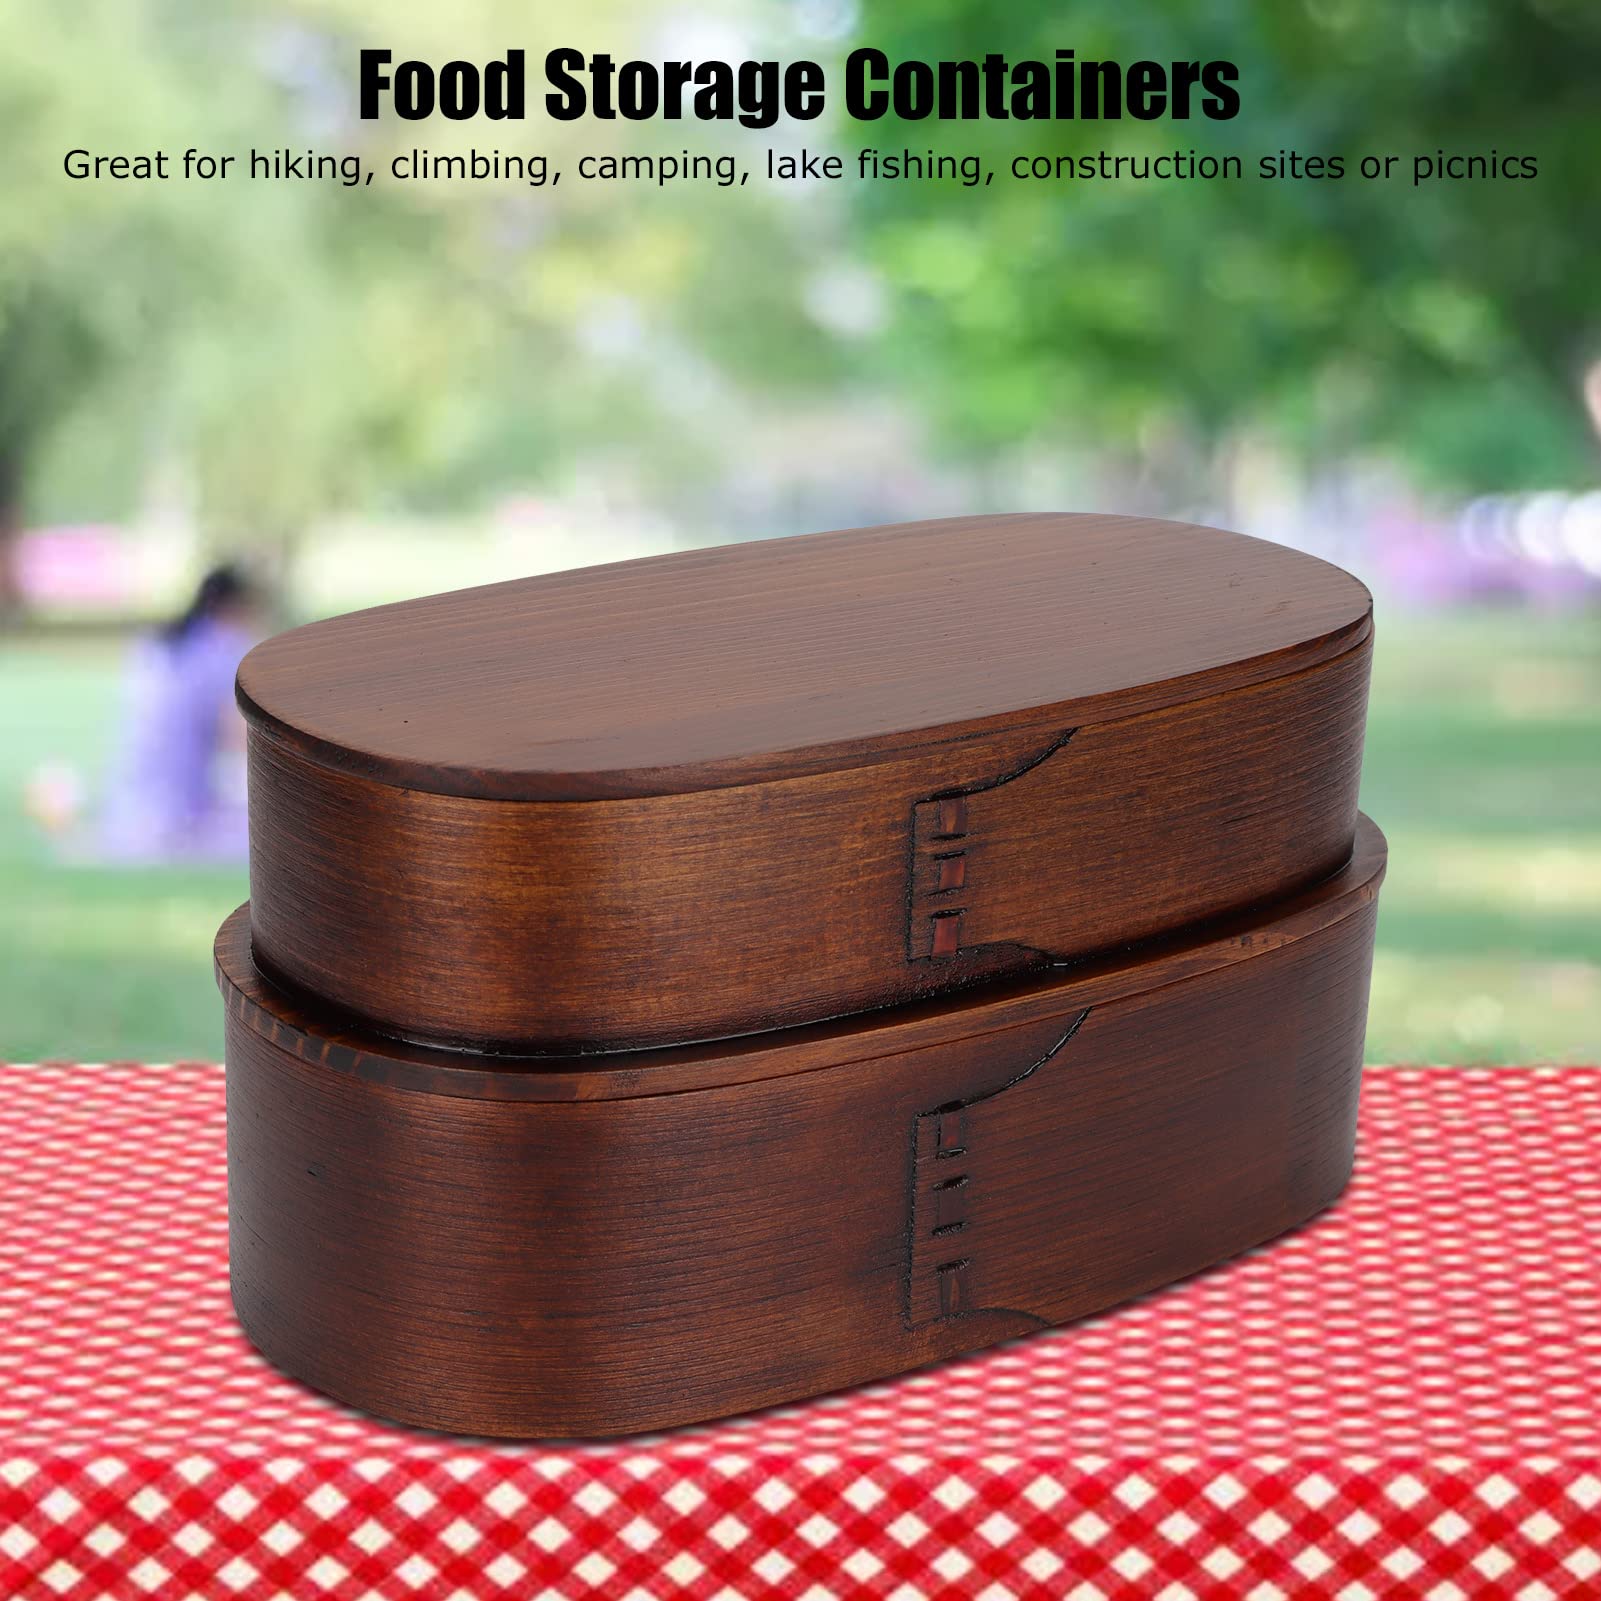 Yosoo 2 Layer Wooden Japanese Bento Box, Food Storage Containers, Easy to Carry, for Hiking, Climbing, Camping, Lake Fishing, Construction Sites, Picnics